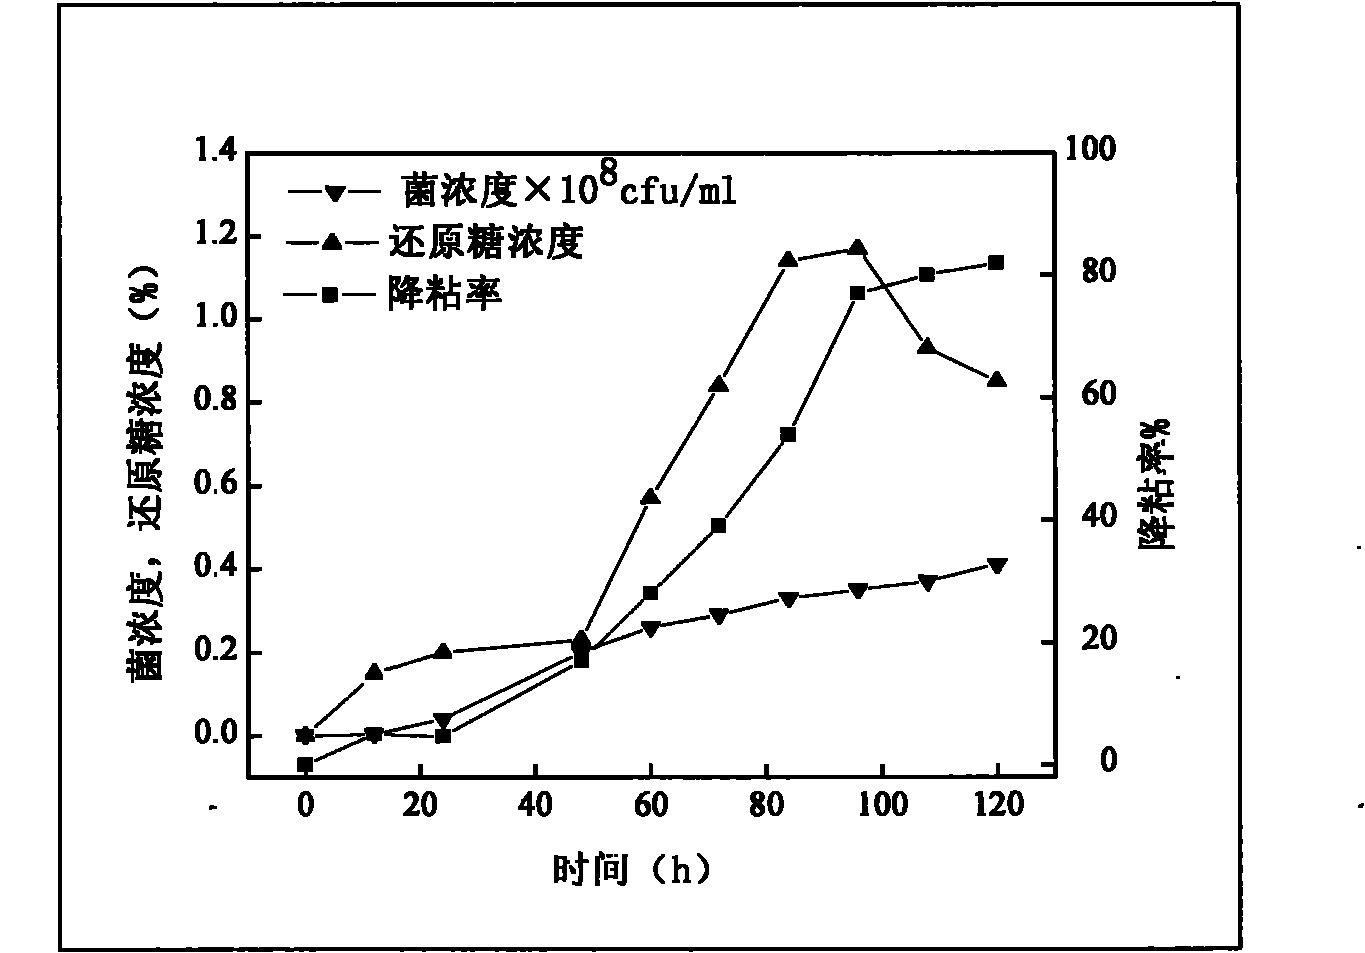 Method for preparing microorganism agent for increasing production of oilfield microorganisms or protecting environment